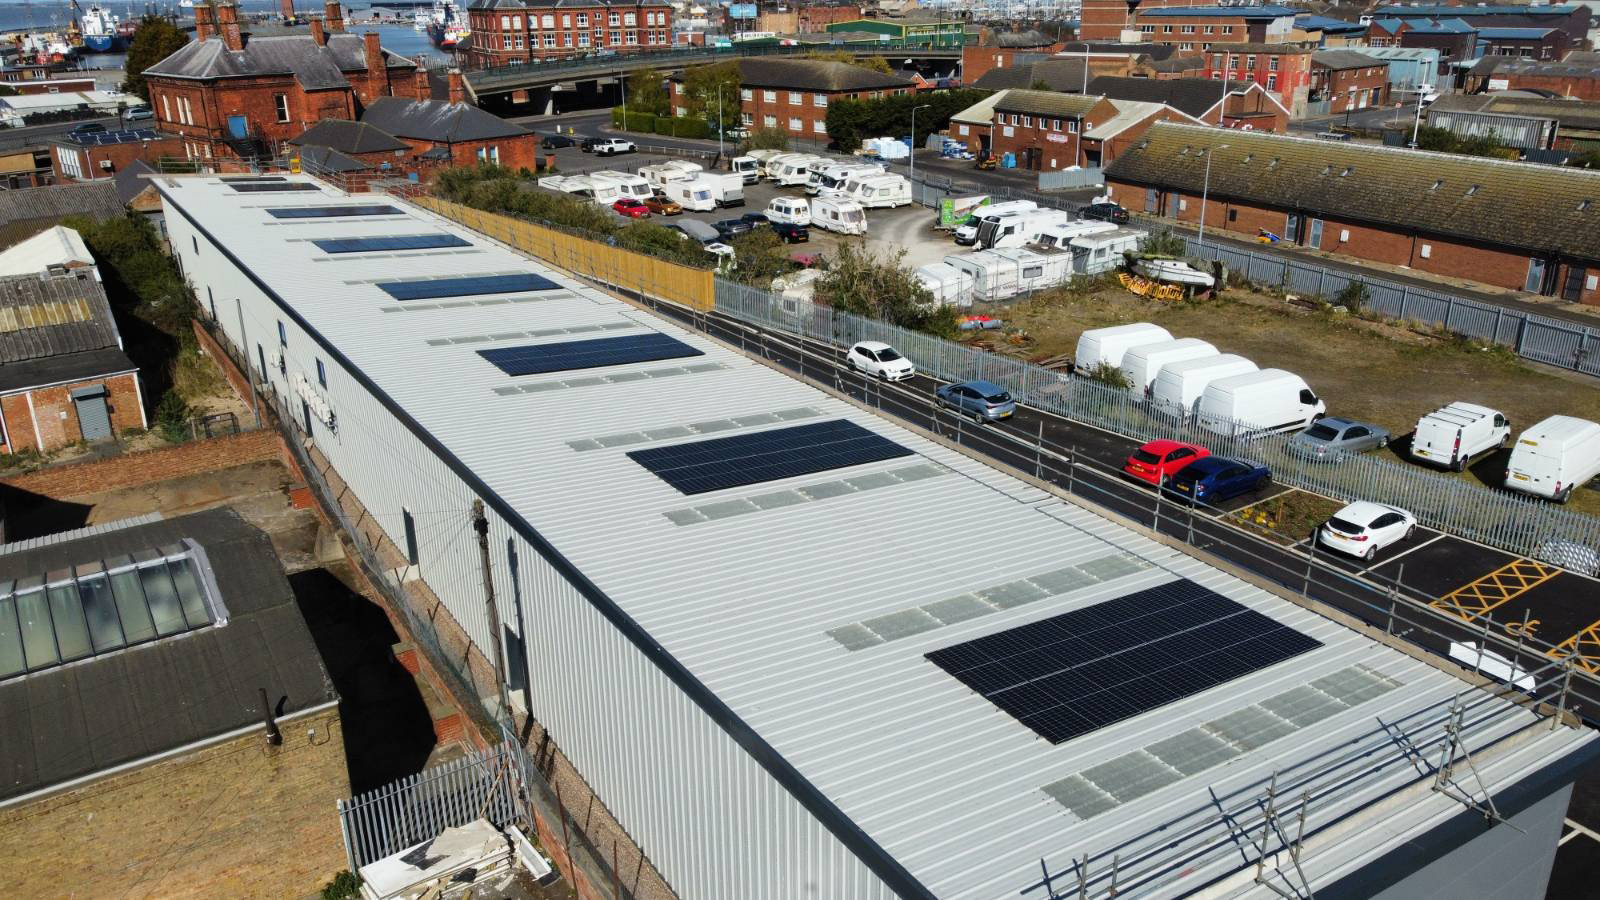 Solar panels installed at the enterprise village in Grimsby